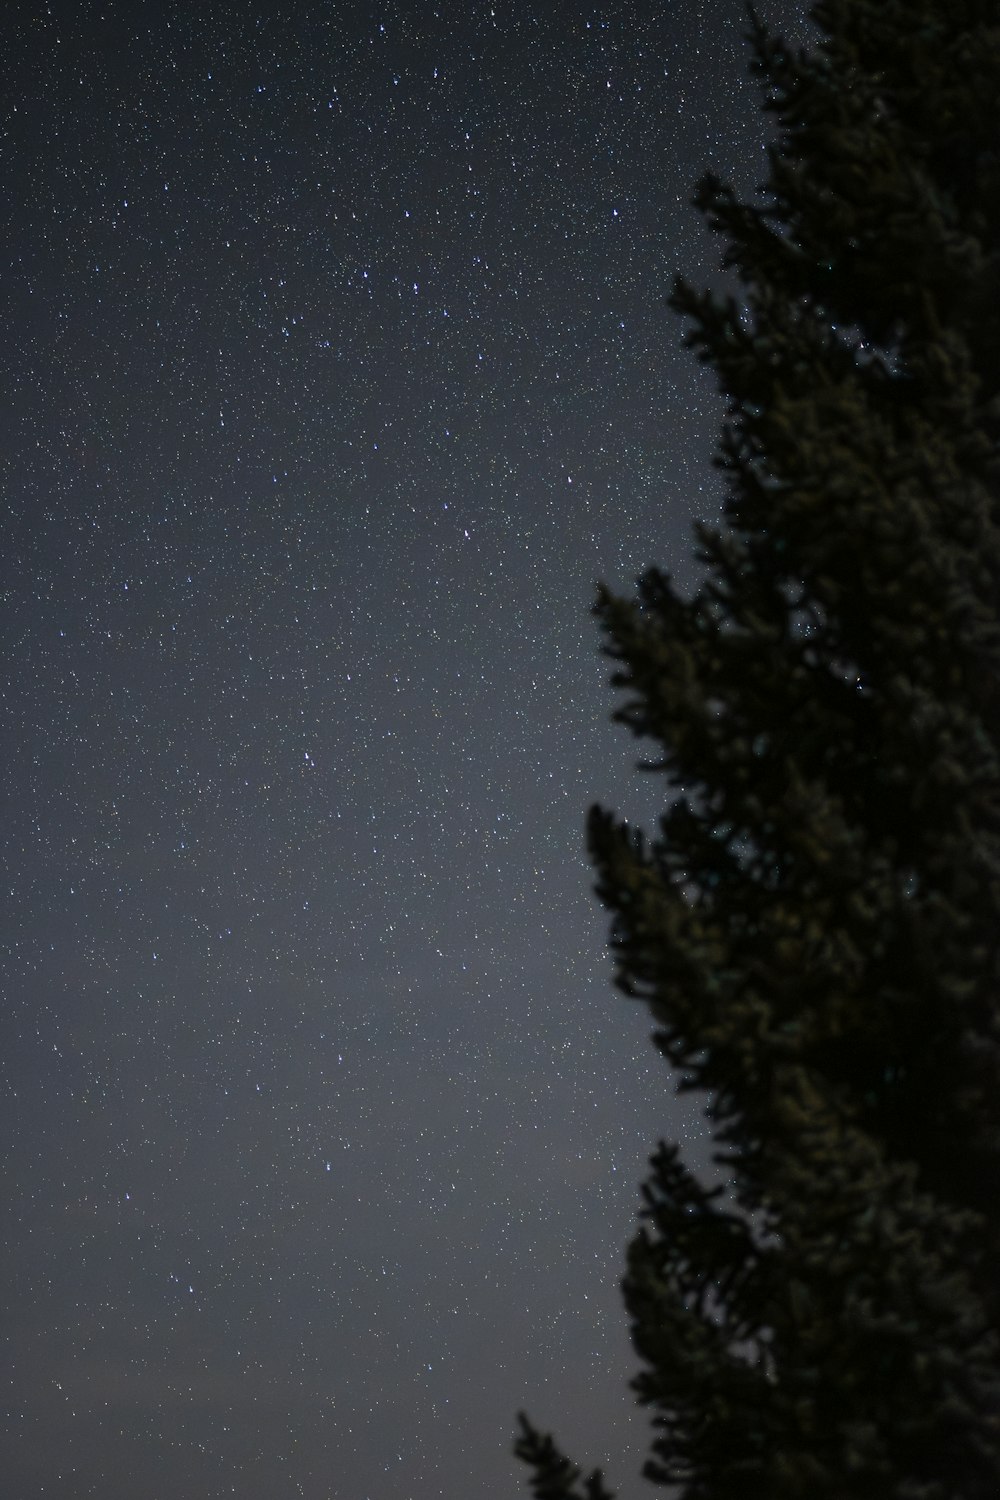 the night sky with stars above a pine tree